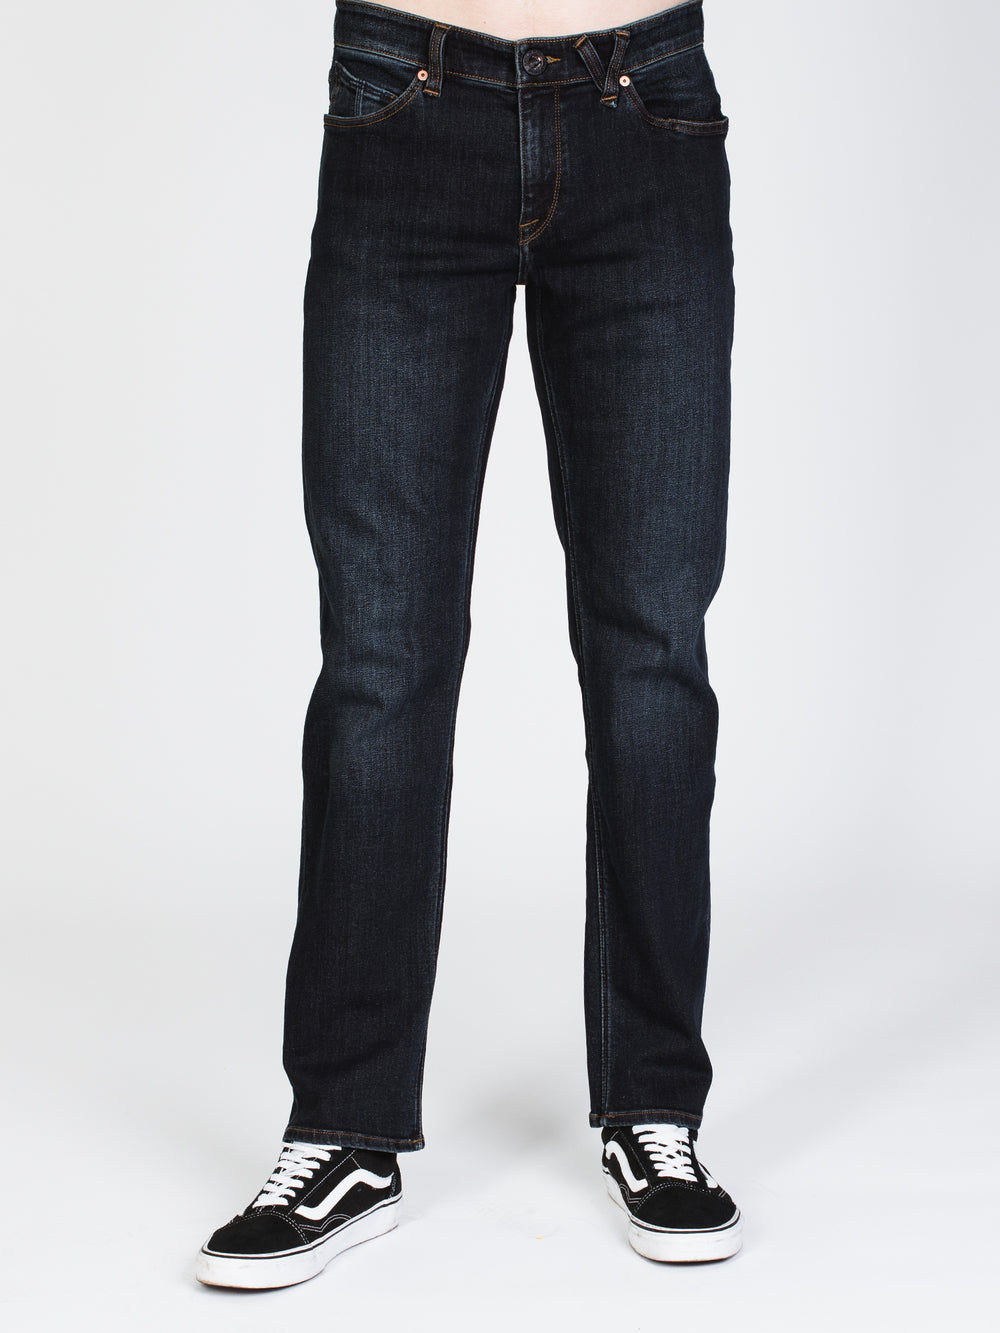 VOLCOM SOLVER JEAN 16"  - CLEARANCE